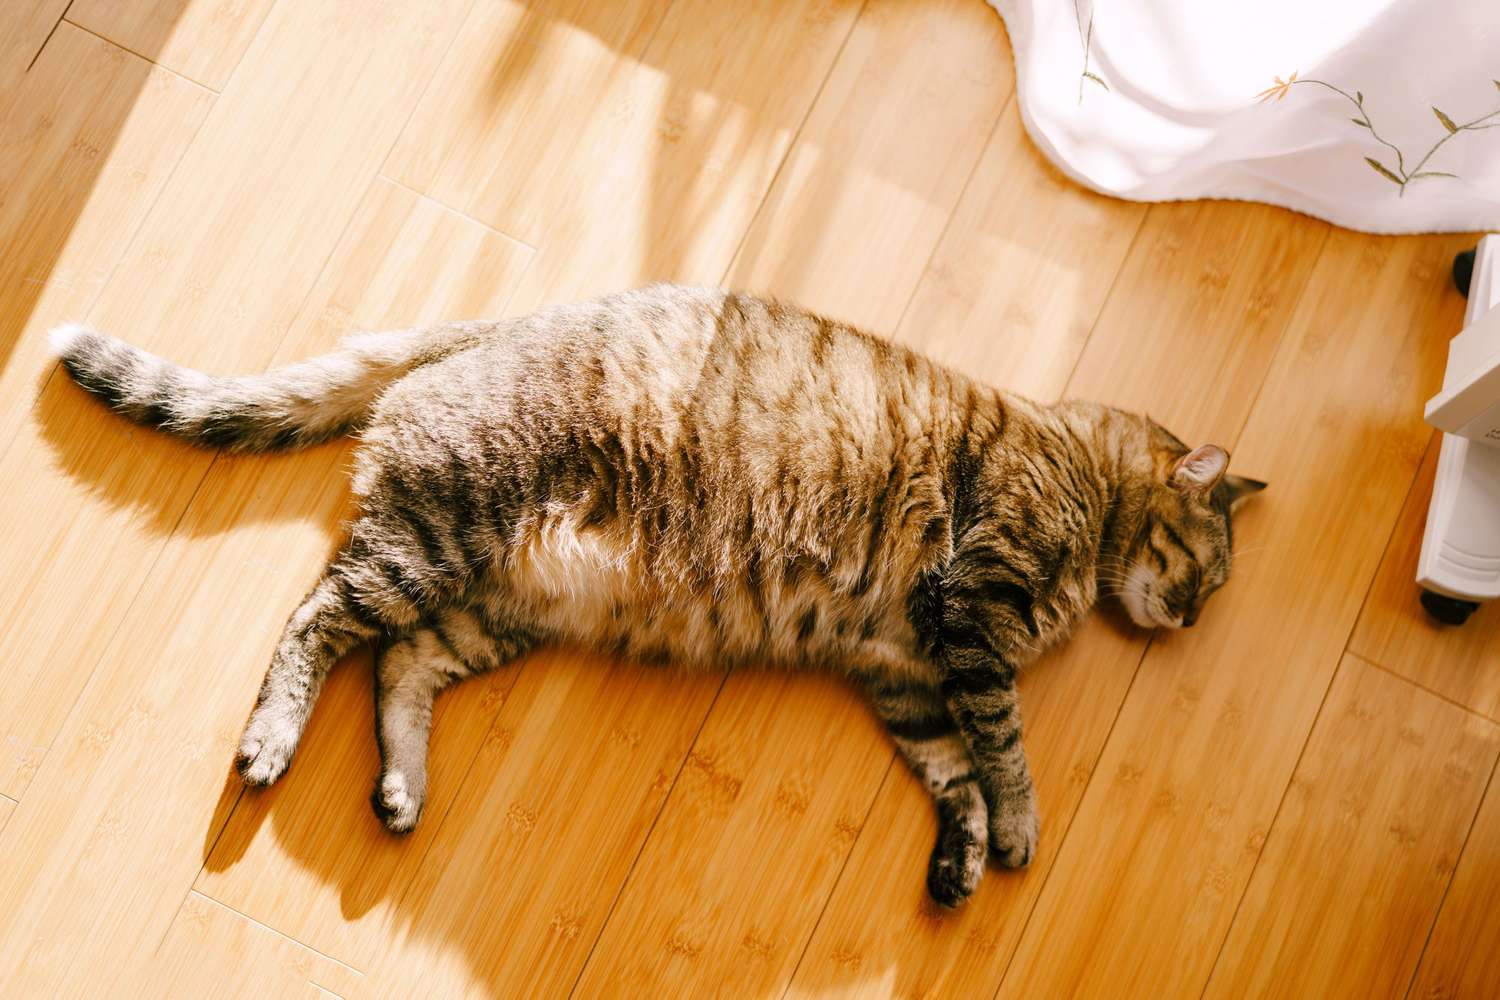 Fat gray fluffy cat on the wooden floor.